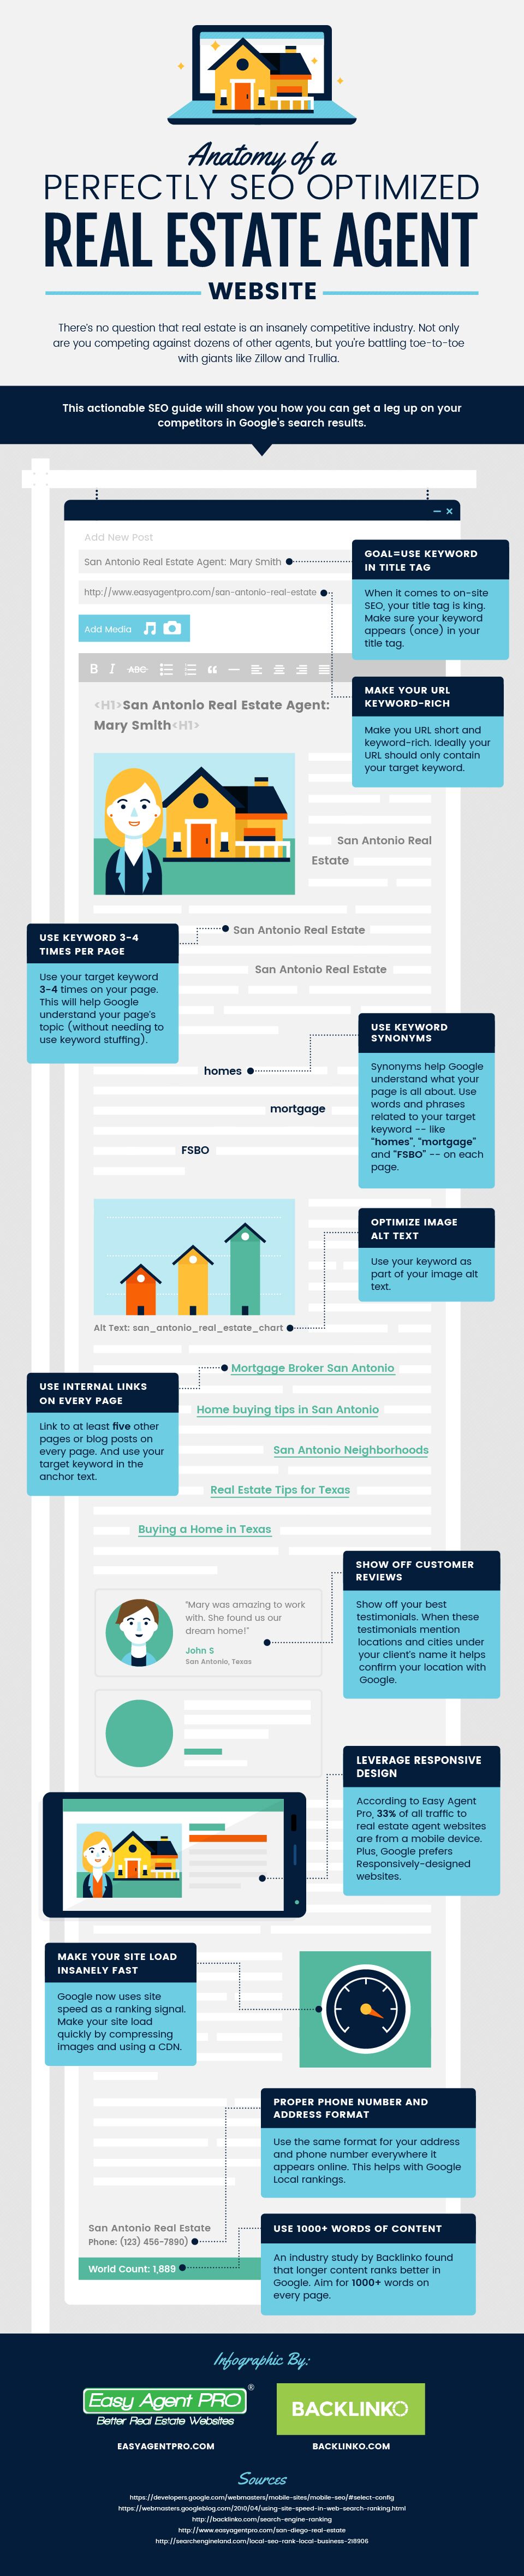 Real Estate SEO Infographic